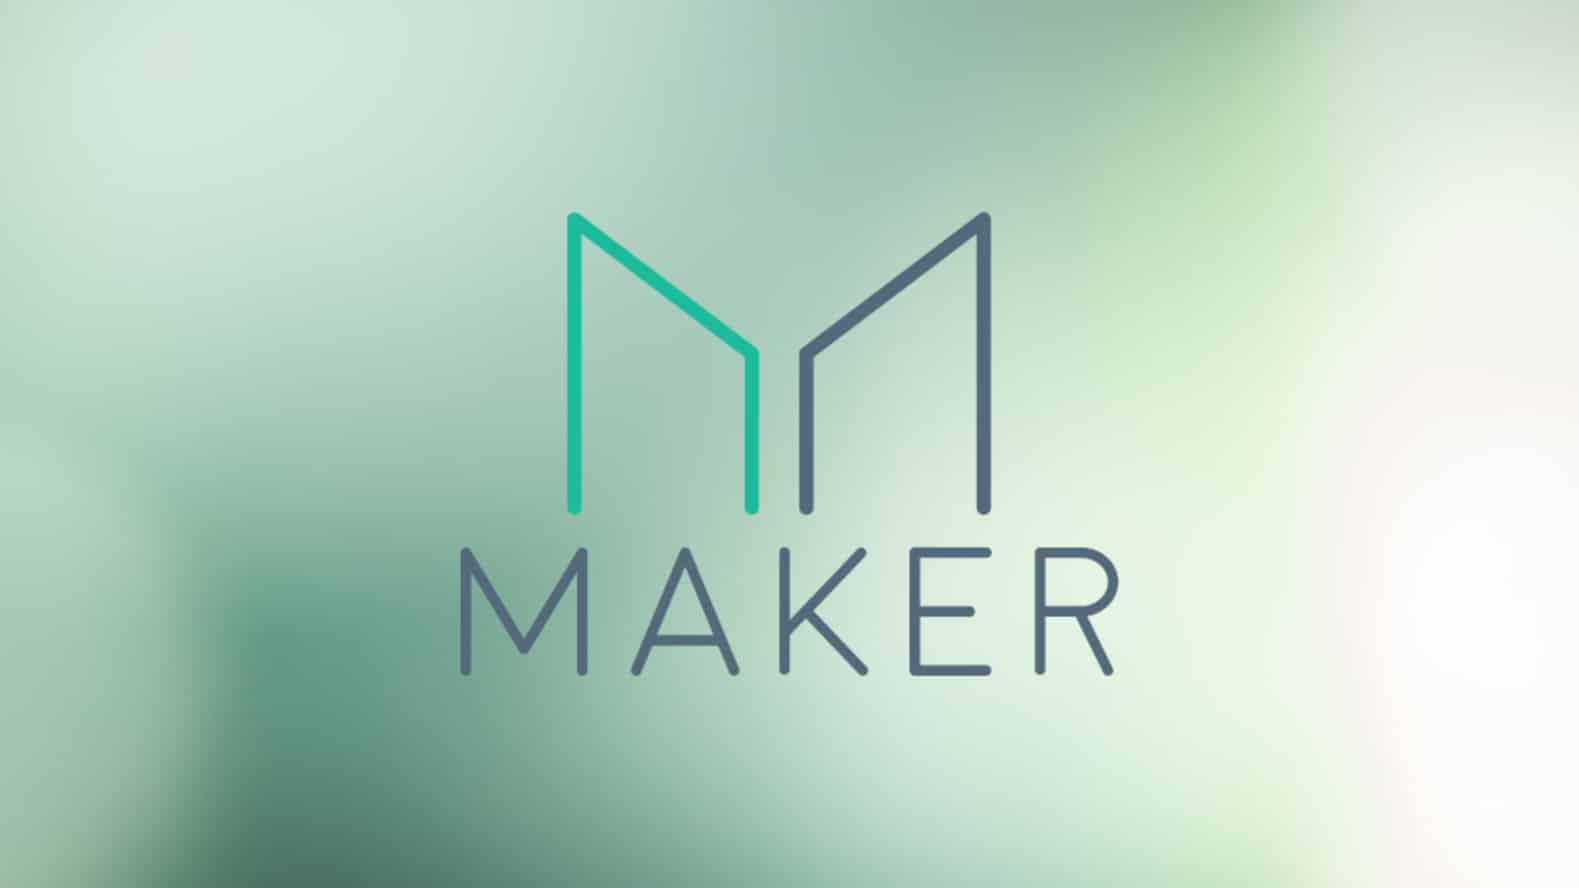 MakerDAO is now fully decentralized